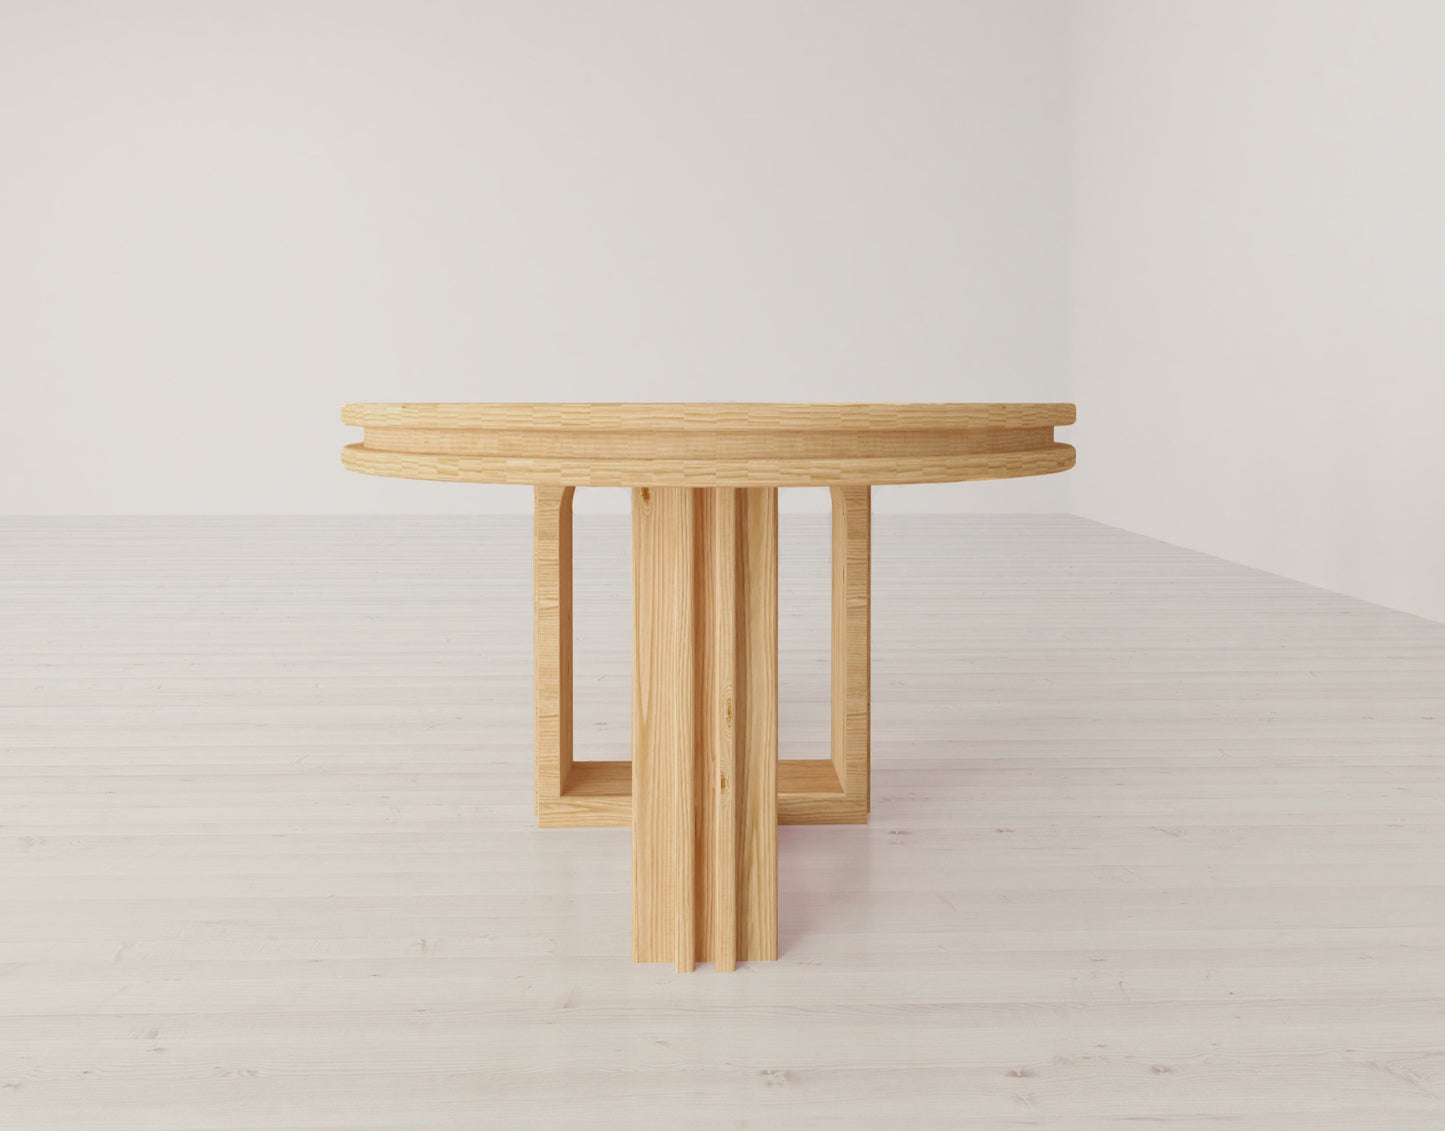 INTRODUCING The Andrya Table